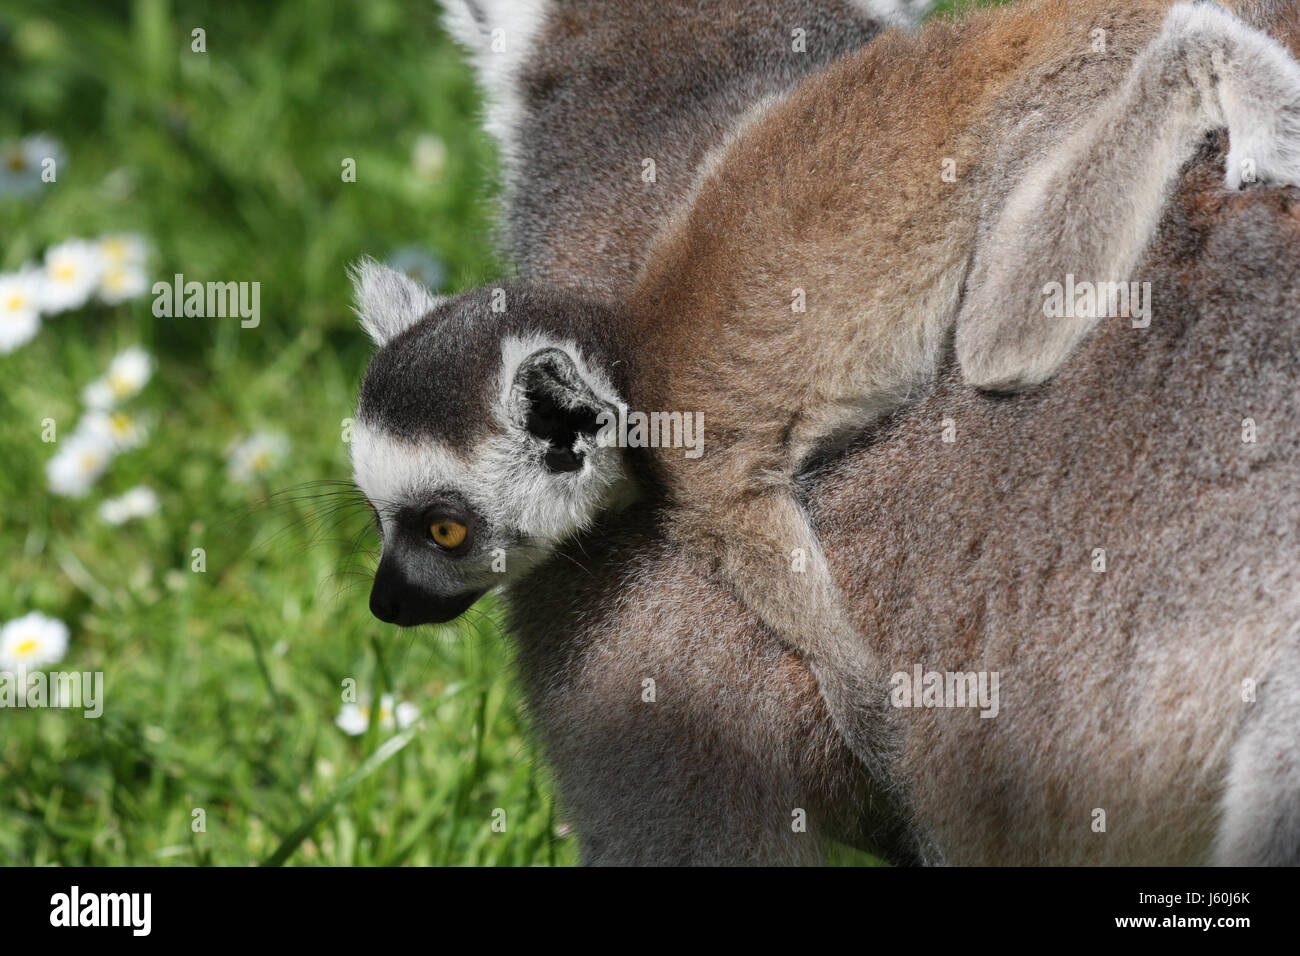 mammal offspring game reserve lemur lemures security secure place mammal Stock Photo